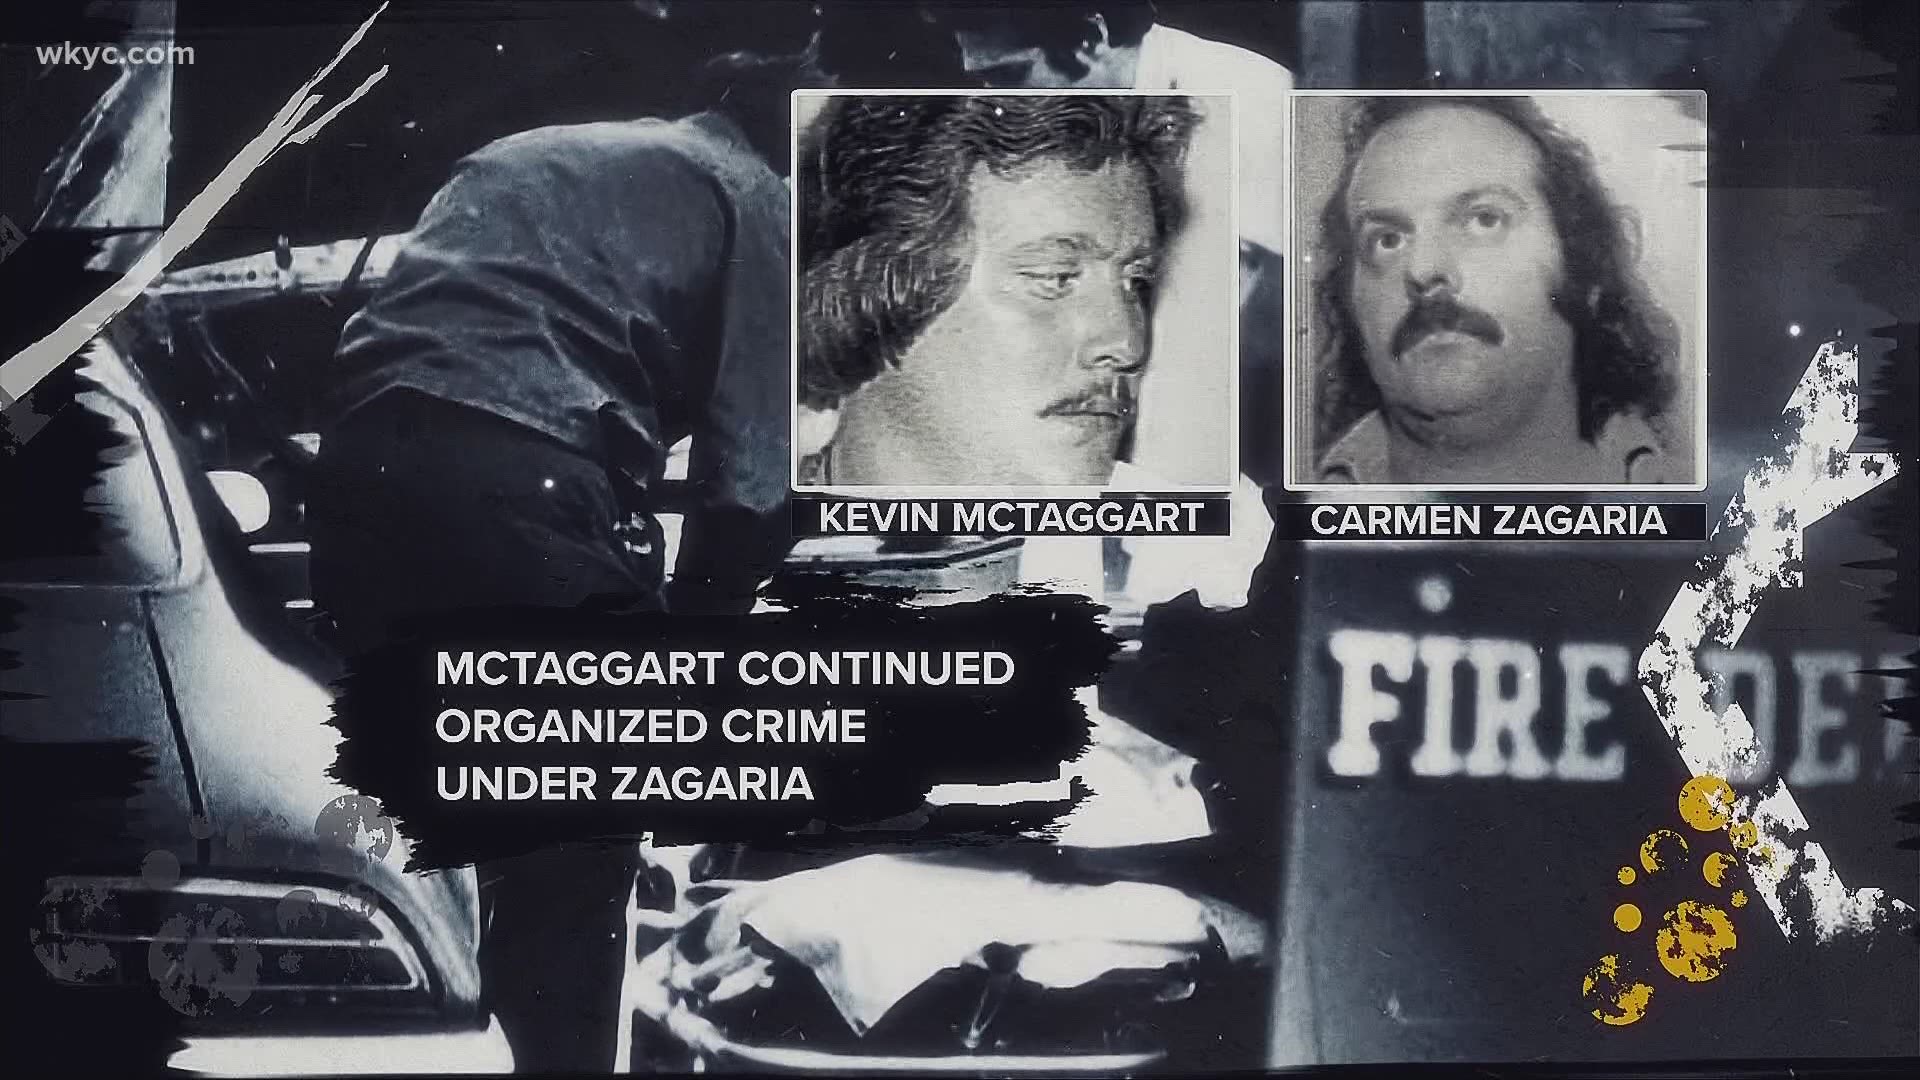 He was part of Cleveland’s notorious underworld, a lieutenant to infamous mobster Danny Greene. 38 years later, all behind bars, Kevin McTaggart wants to come home.